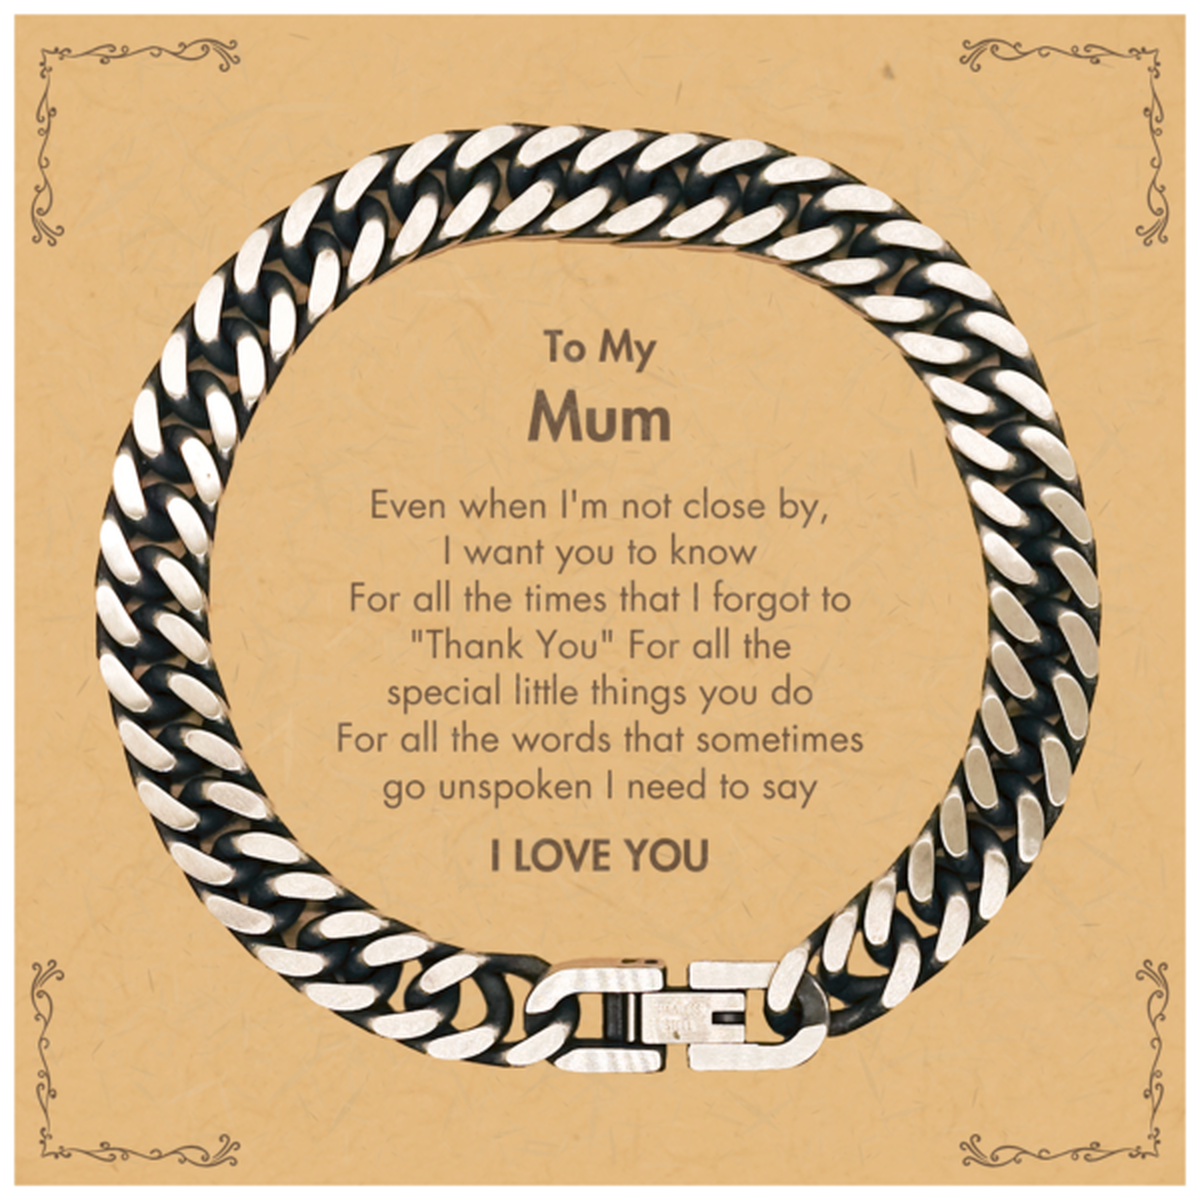 Thank You Gifts for Mum, Keepsake Cuban Link Chain Bracelet Gifts for Mum Birthday Mother's day Father's Day Mum For all the words That sometimes go unspoken I need to say I LOVE YOU